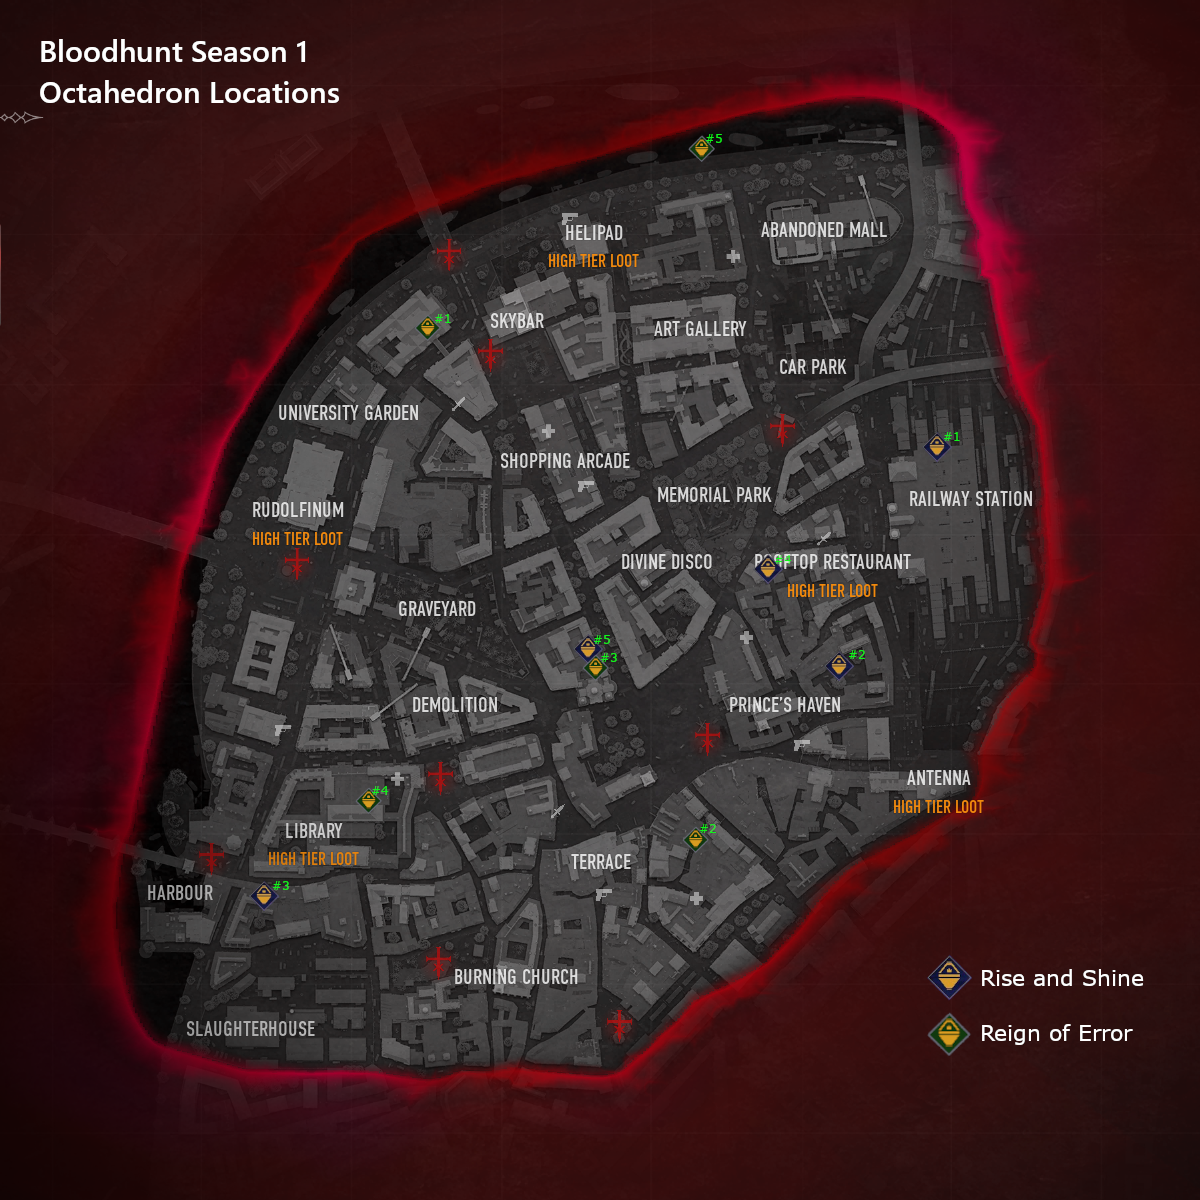 Vampire: The Masquerade - Bloodhunt Story & Intel Octahedron Collectibles for Season 1